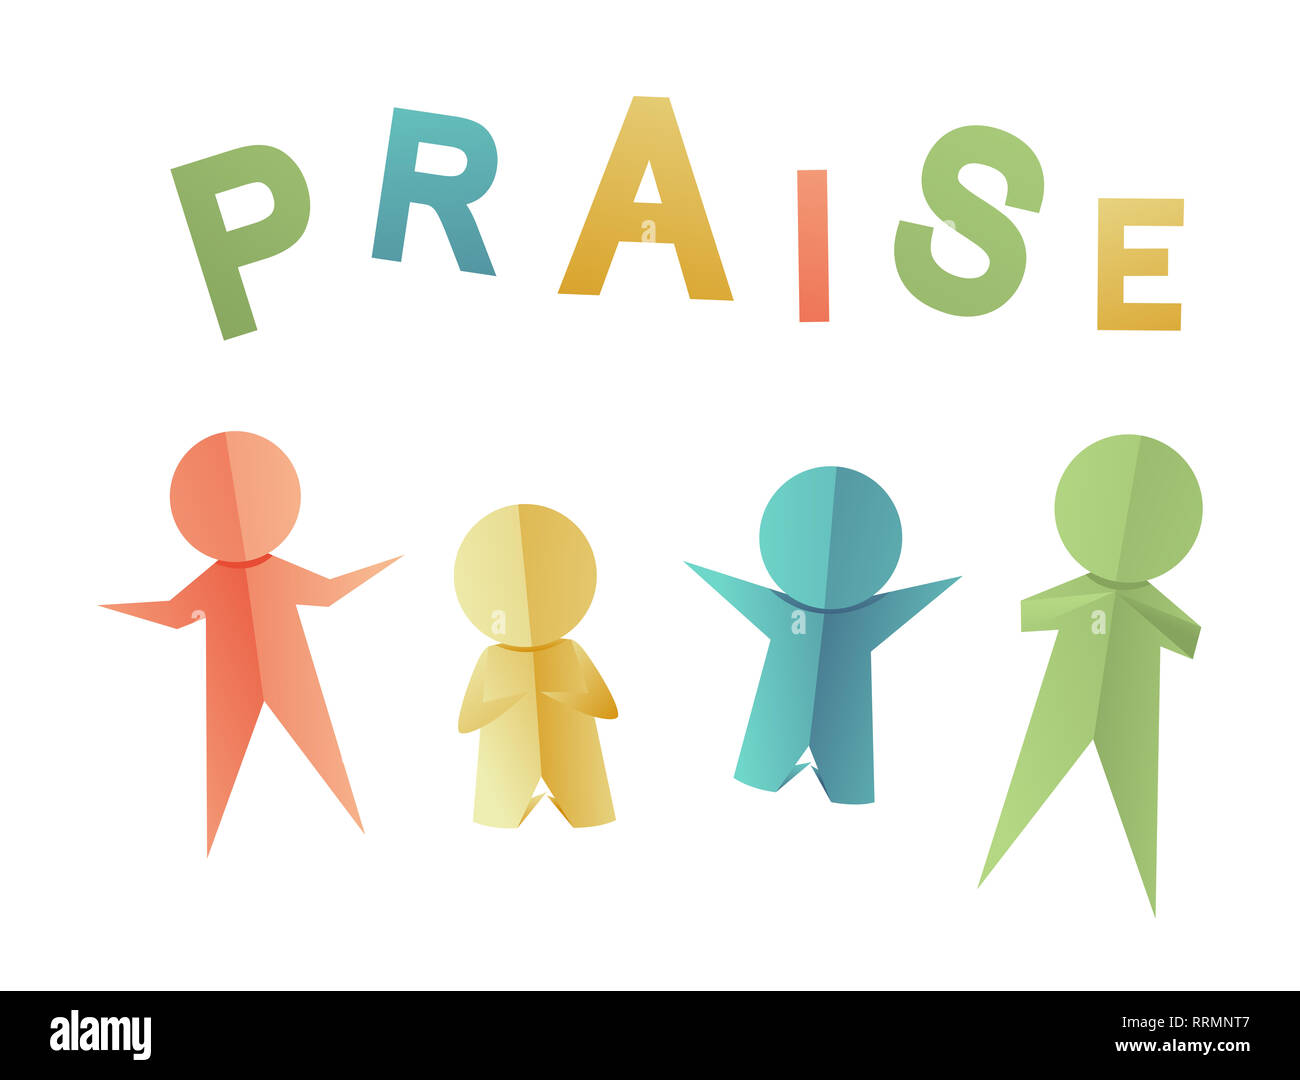 Illustration of Paper Cutout of People, Some with Hands Up and Others Kneeling with Praise Lettering Stock Photo